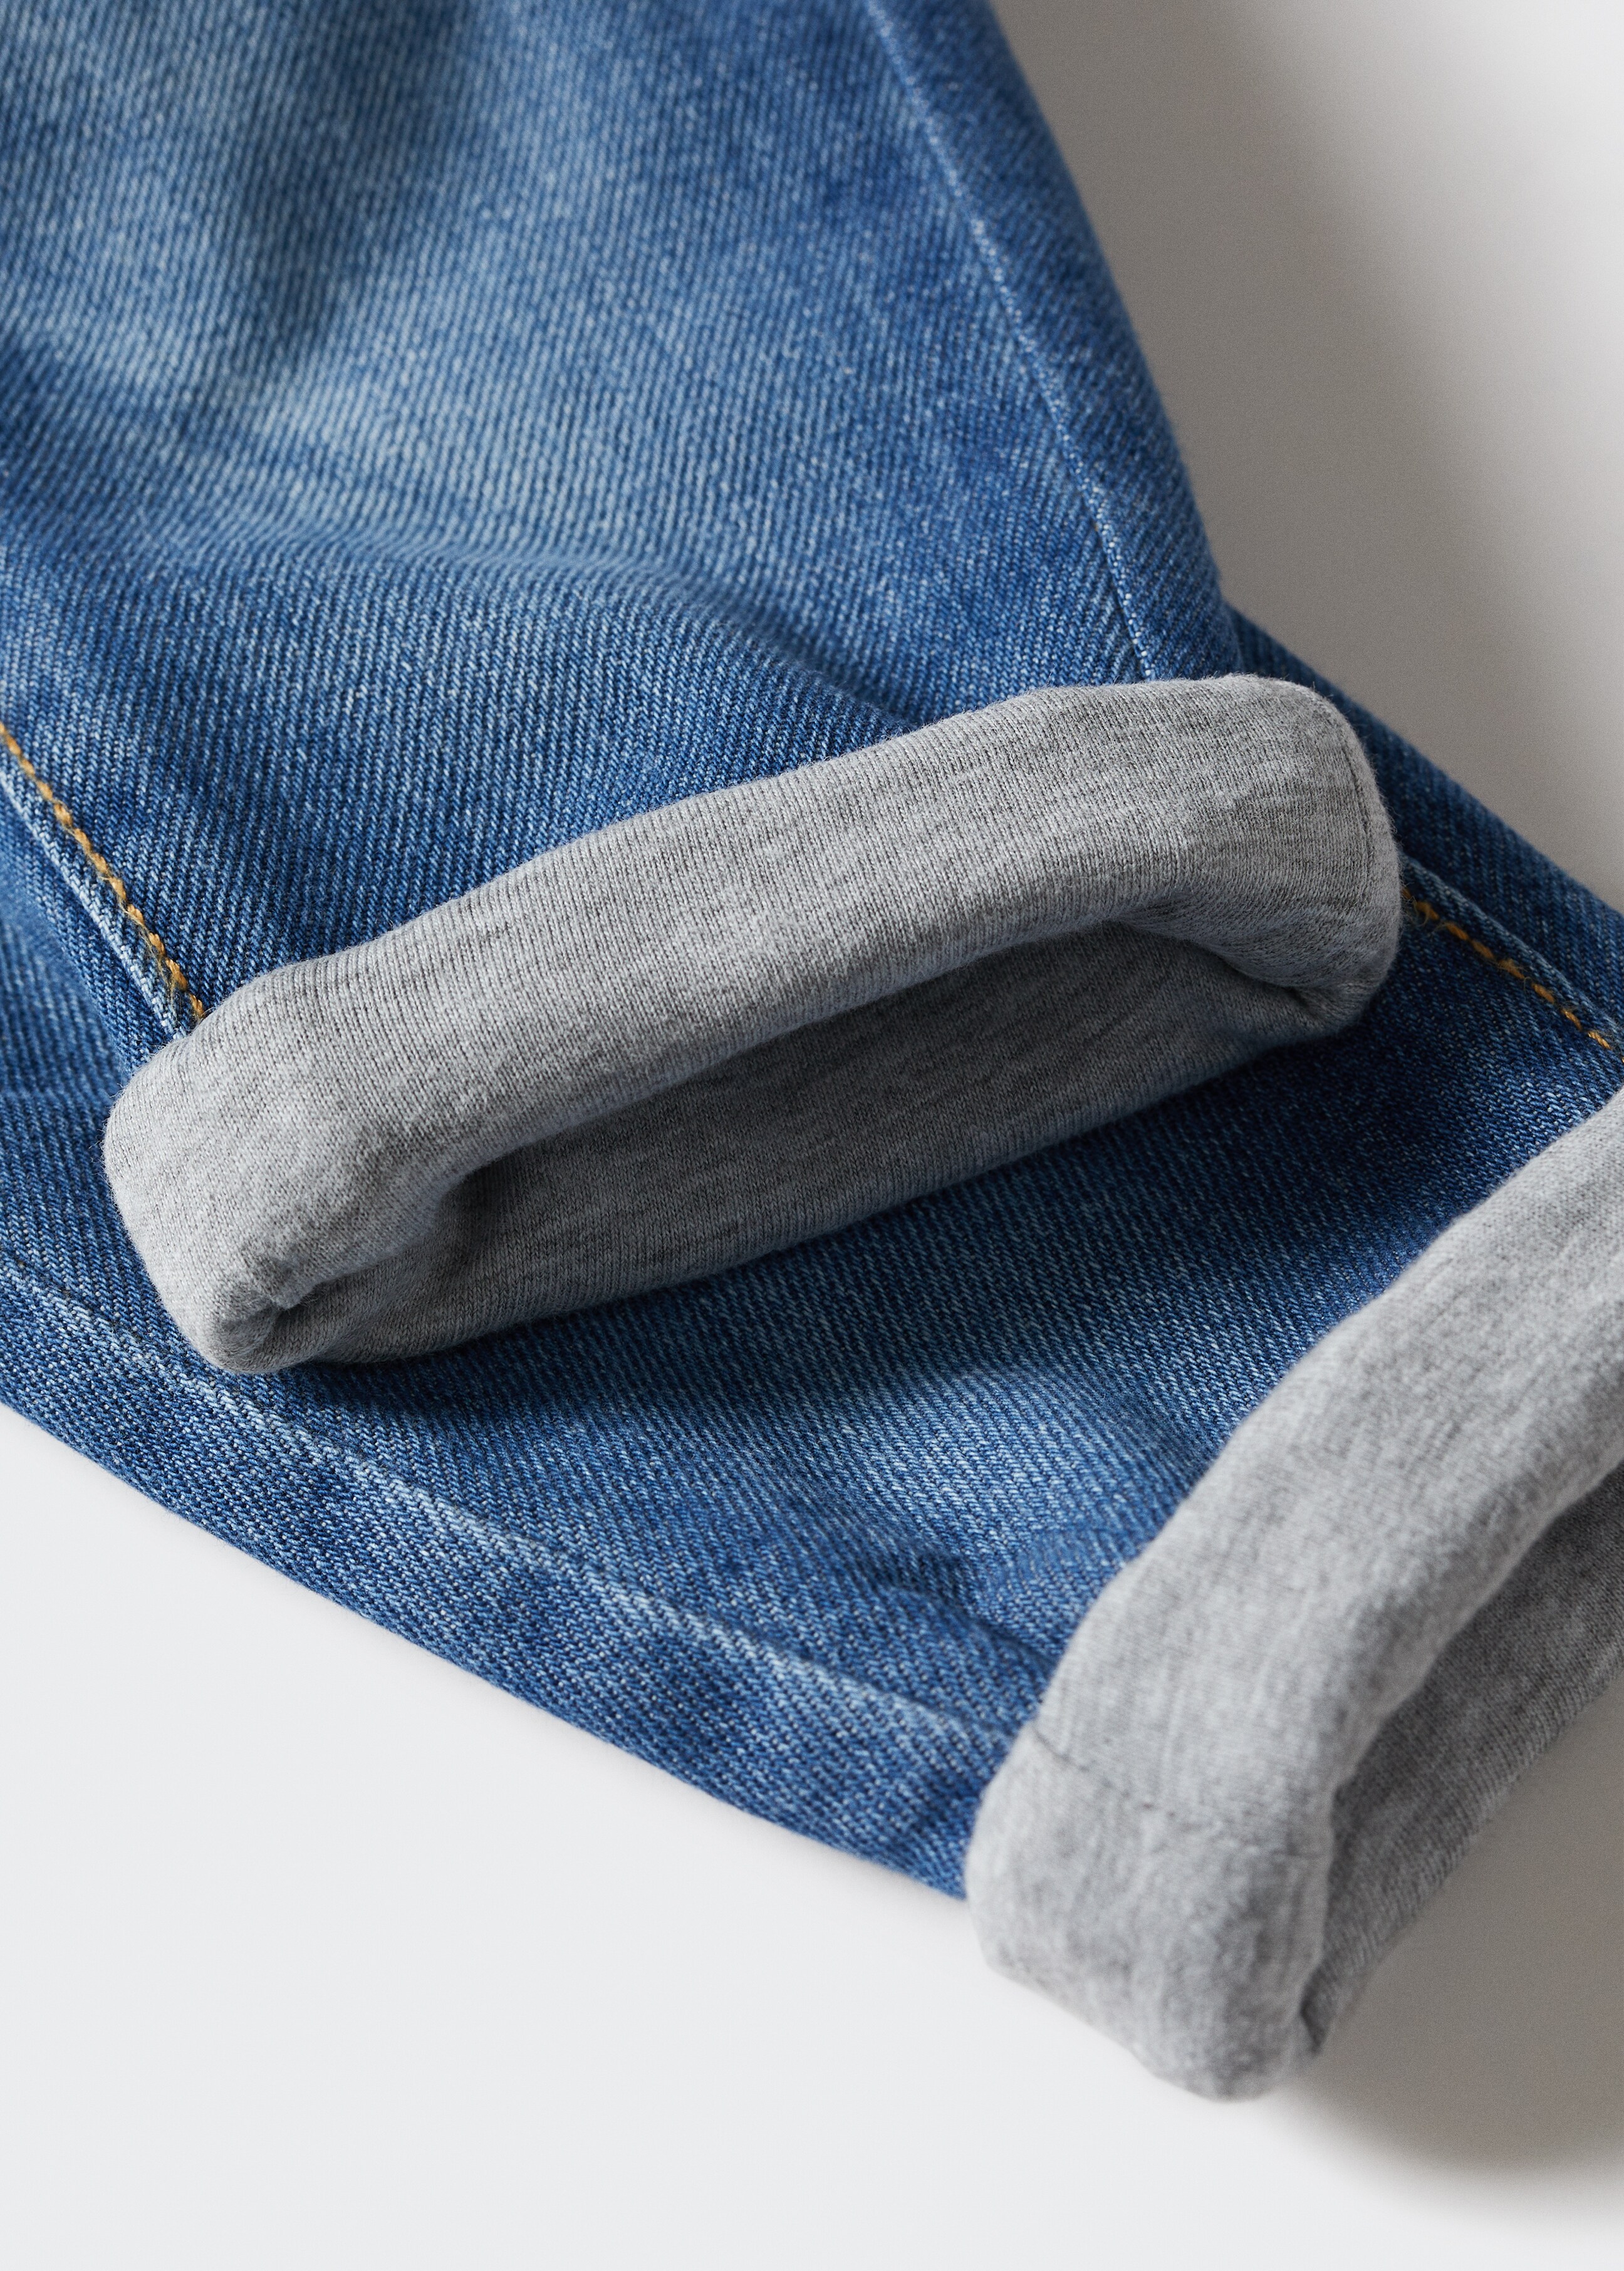 Drawstring waist jeans - Details of the article 9